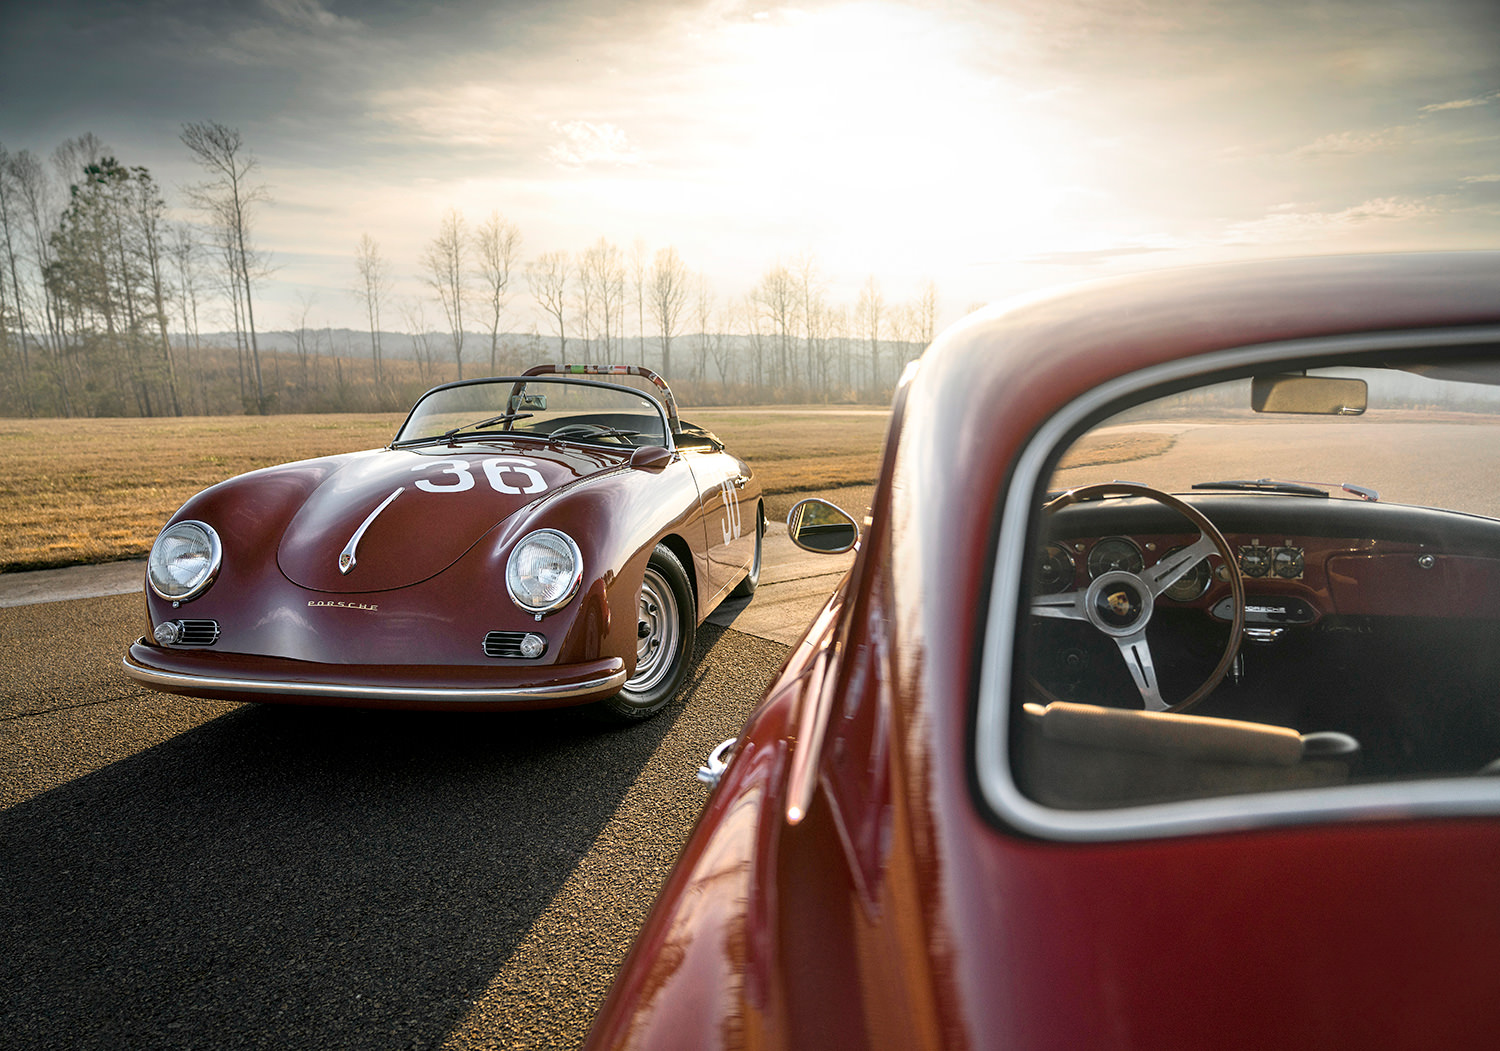 000 Magazine: A Pair of 356 Rubies